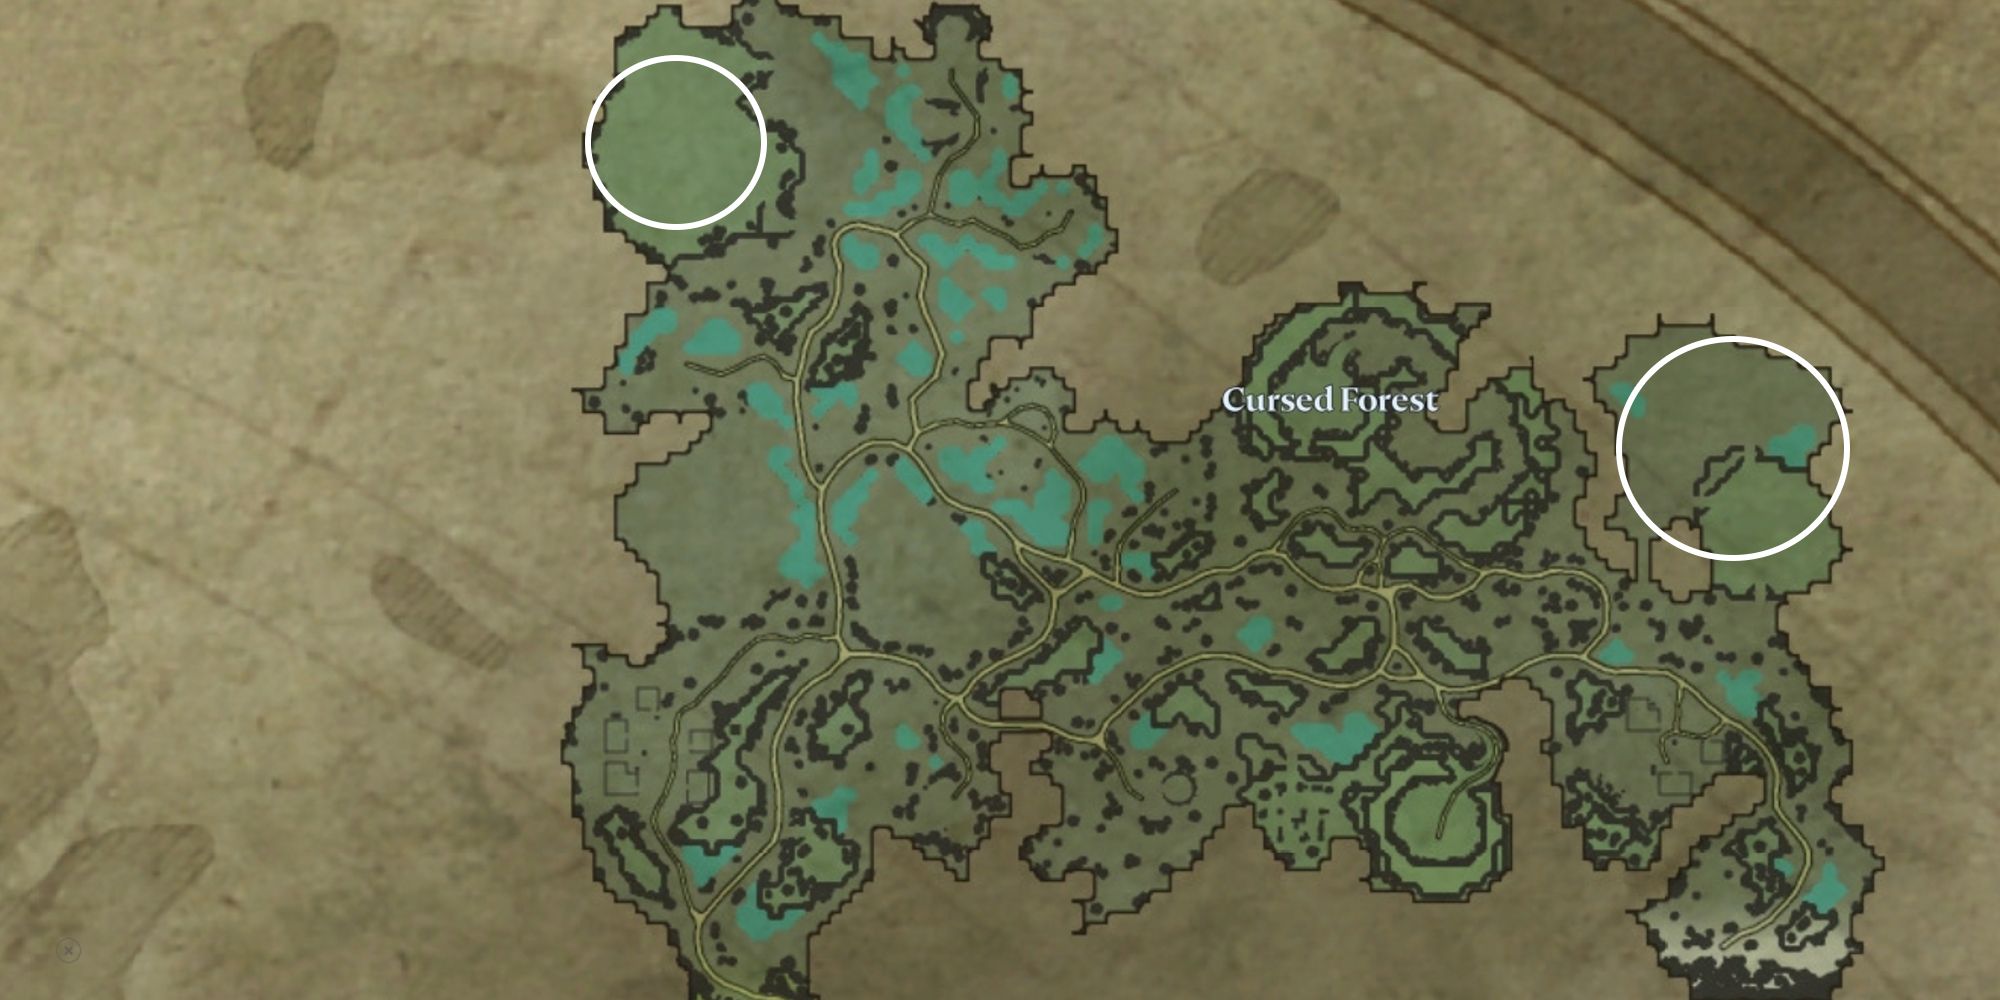 map of cursed forest with potential castle build locations circled